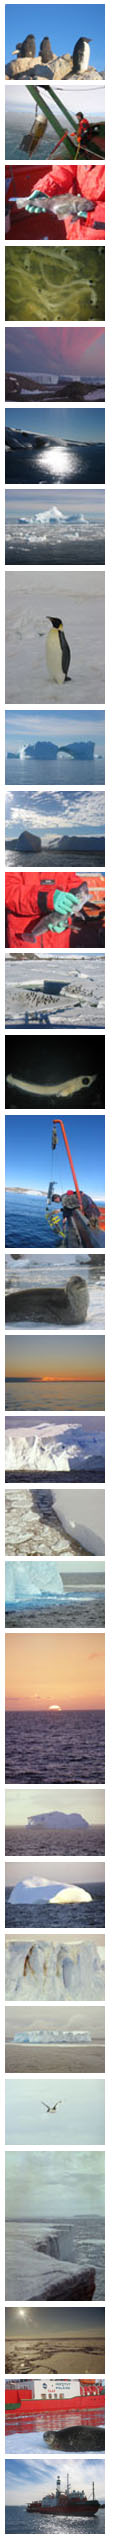 Response of the Southern Ocean global ecosystem to physical and trophic constraints